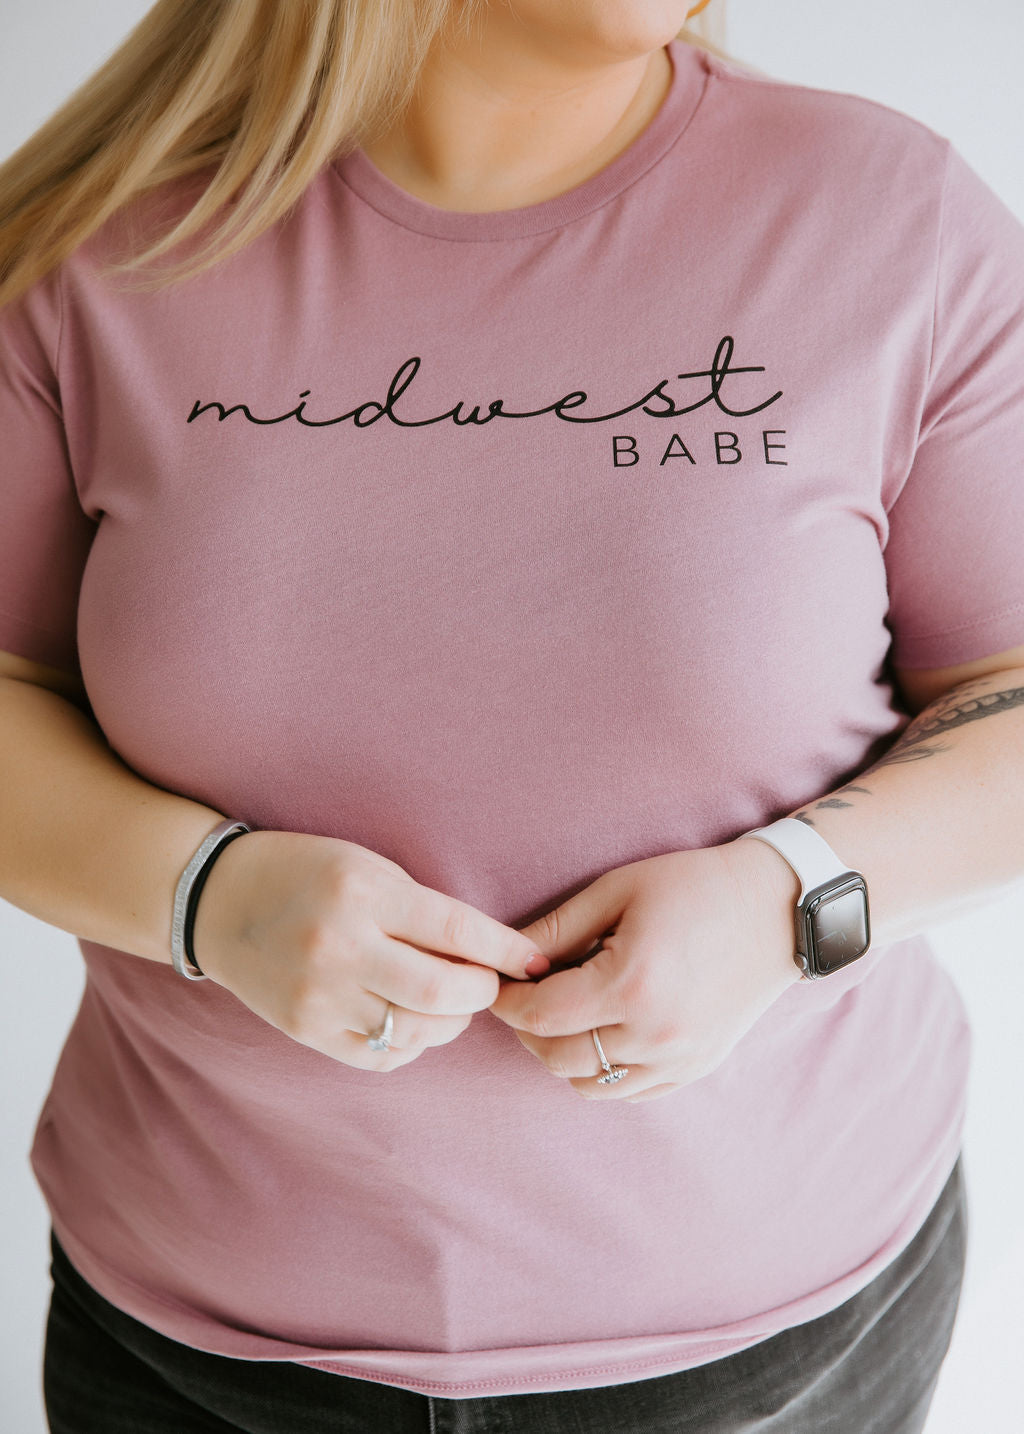 Midwest Babe Cotton Tee